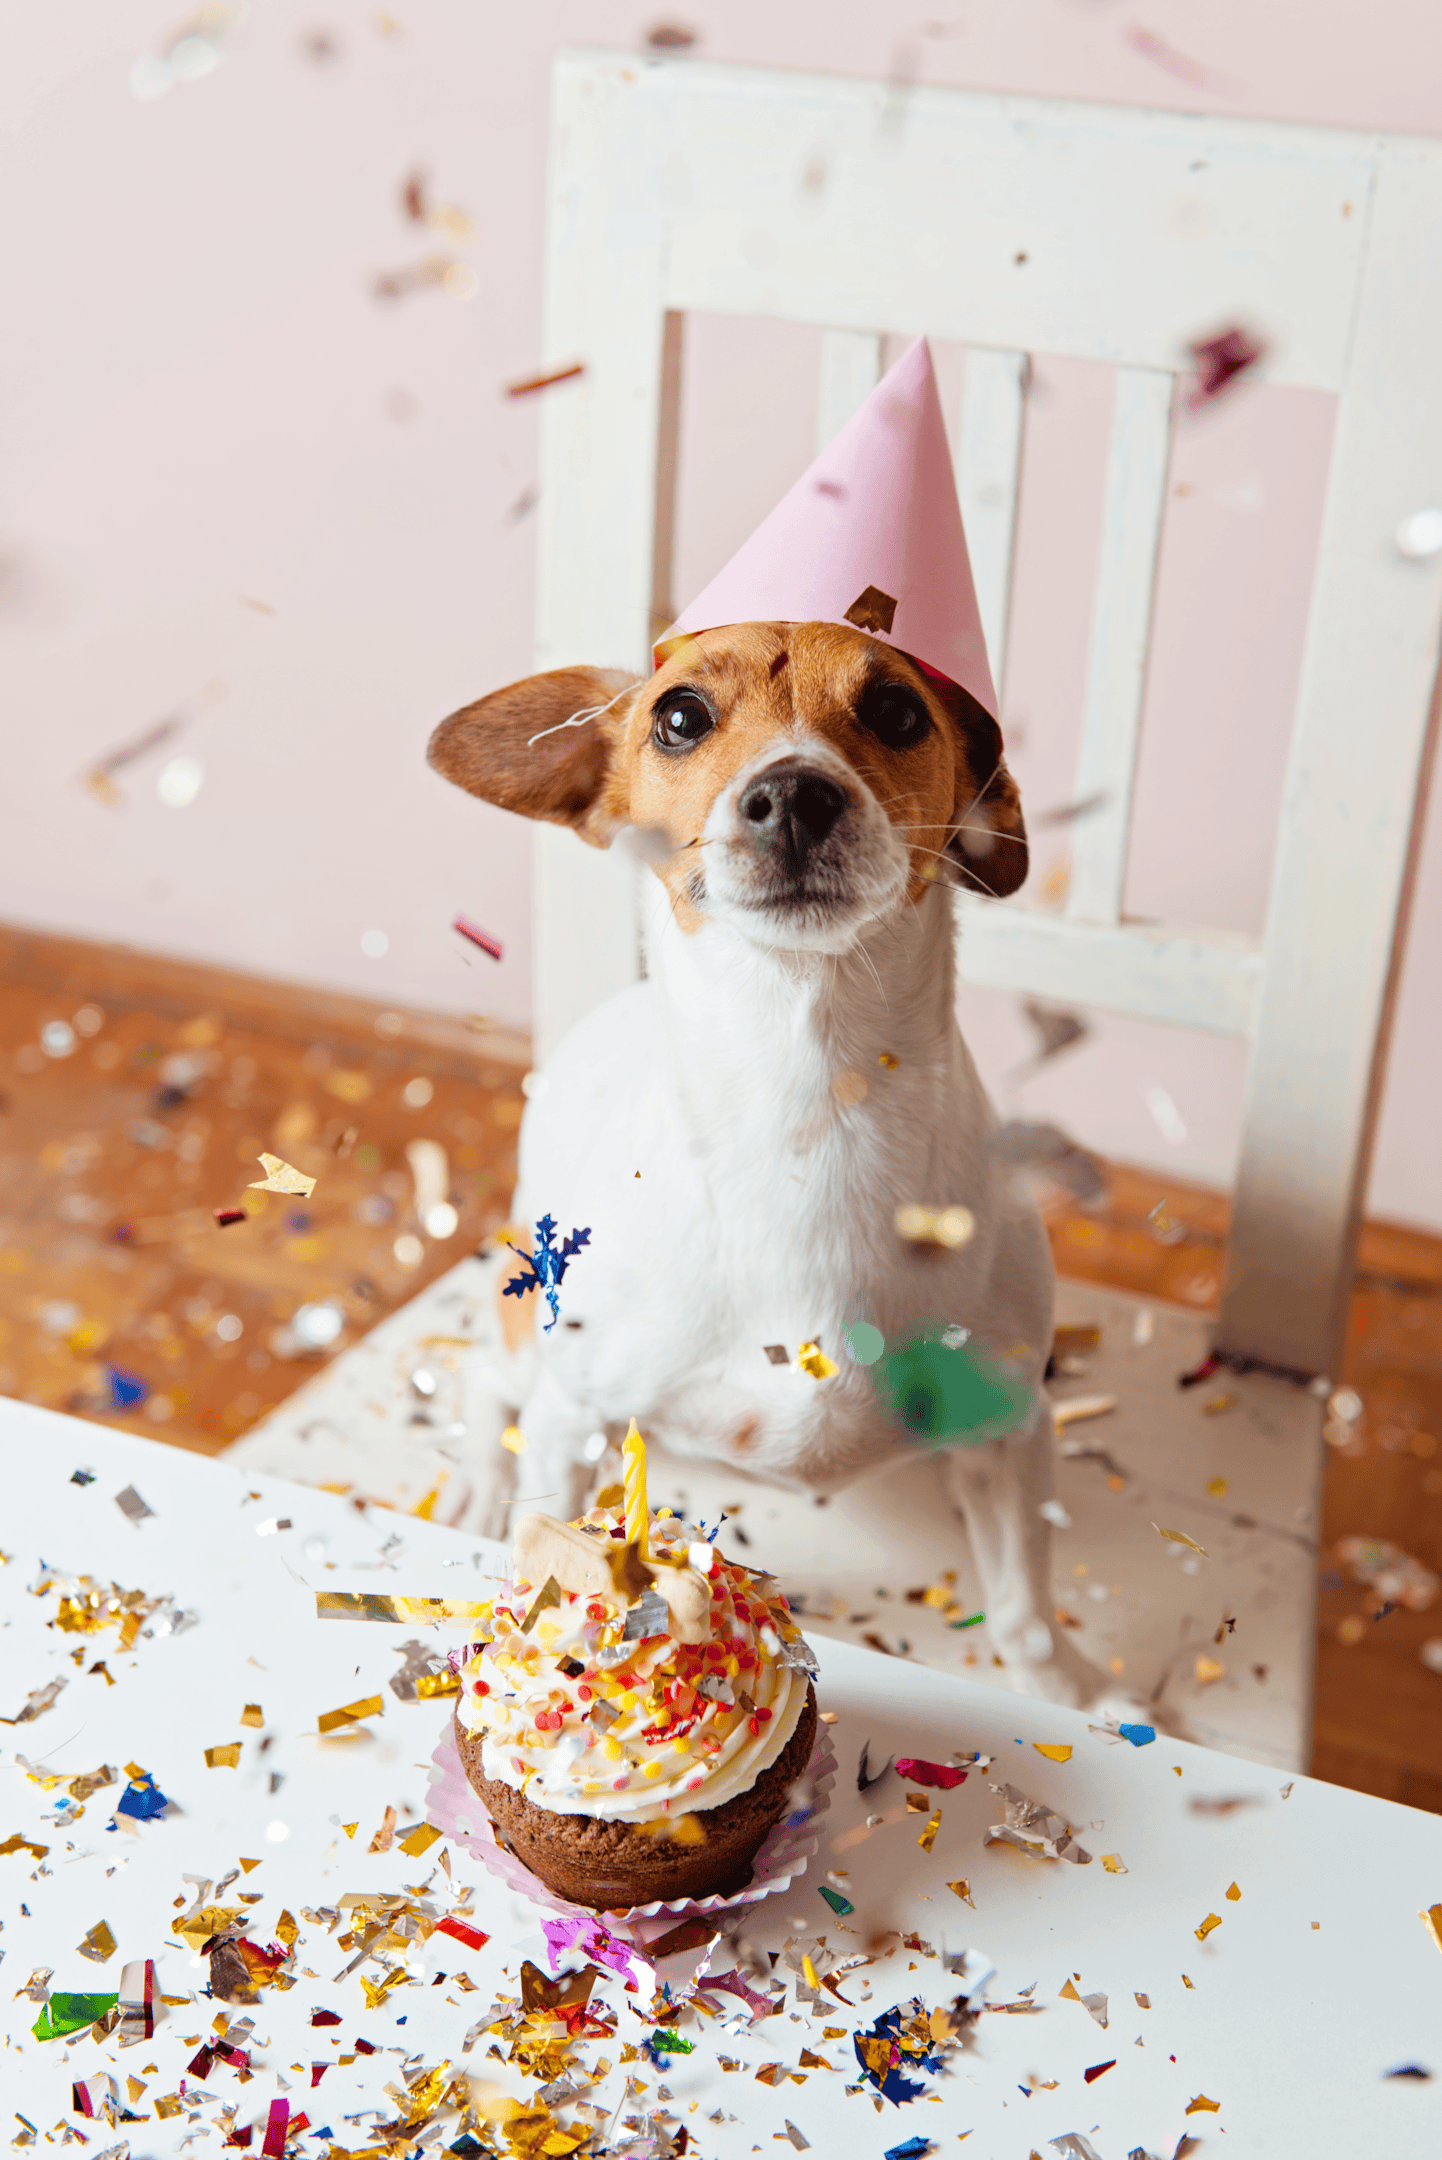 Celebrate your dog birthday like he is a member of your family. Have cakes, presents, and guests for celebrating.